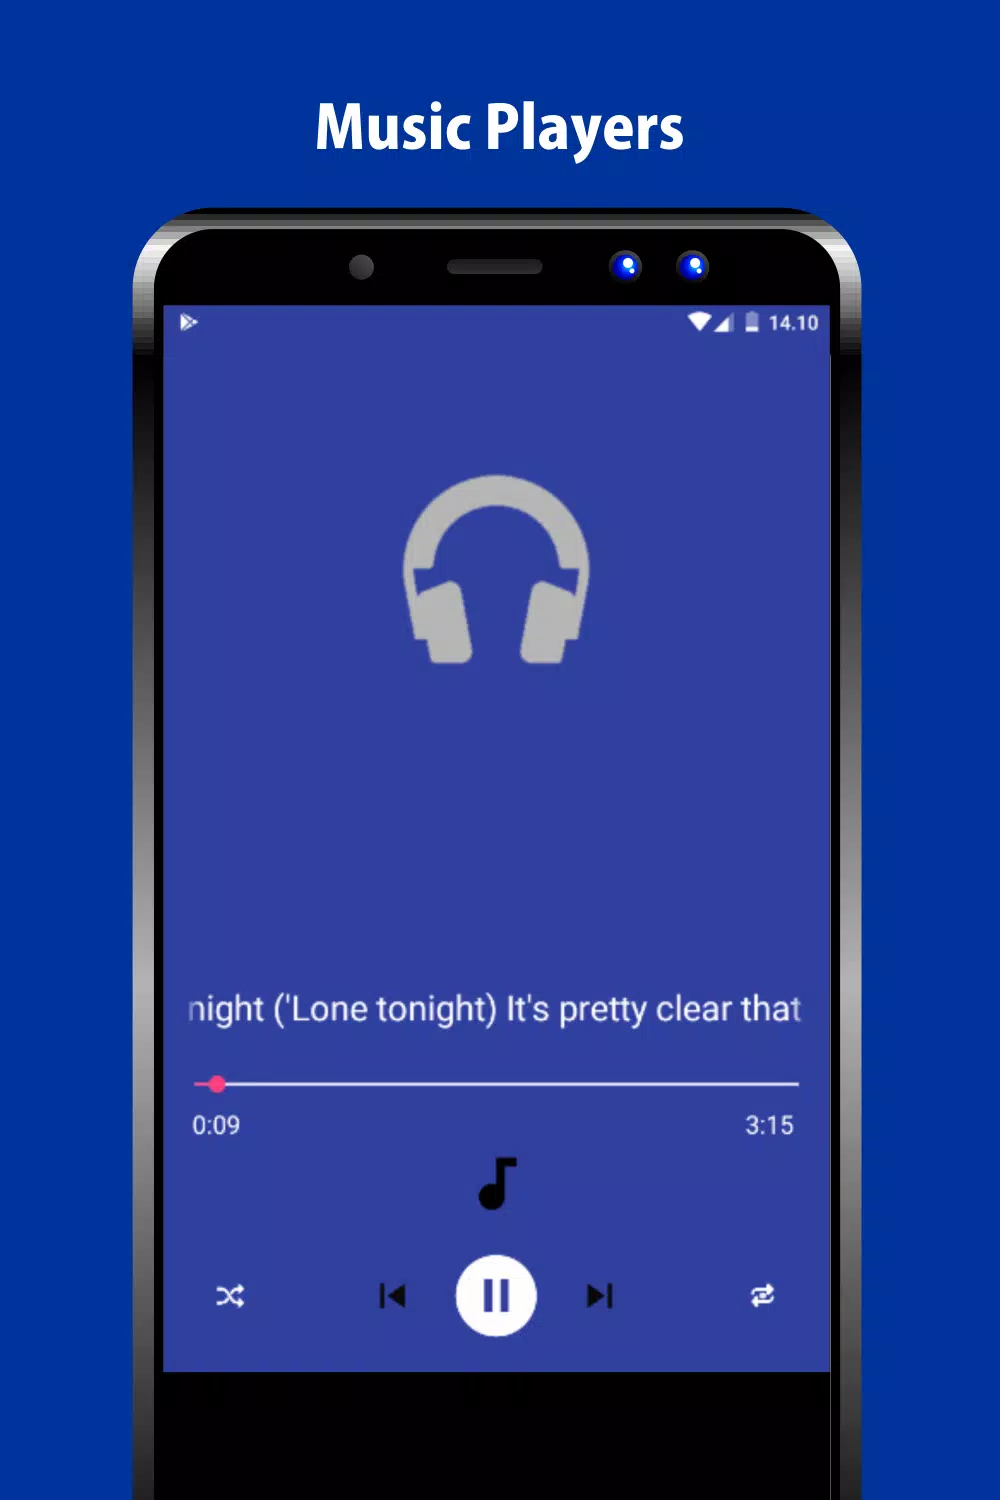 Lewis Capaldi - Someone You Loved MP3 APK pour Android Télécharger